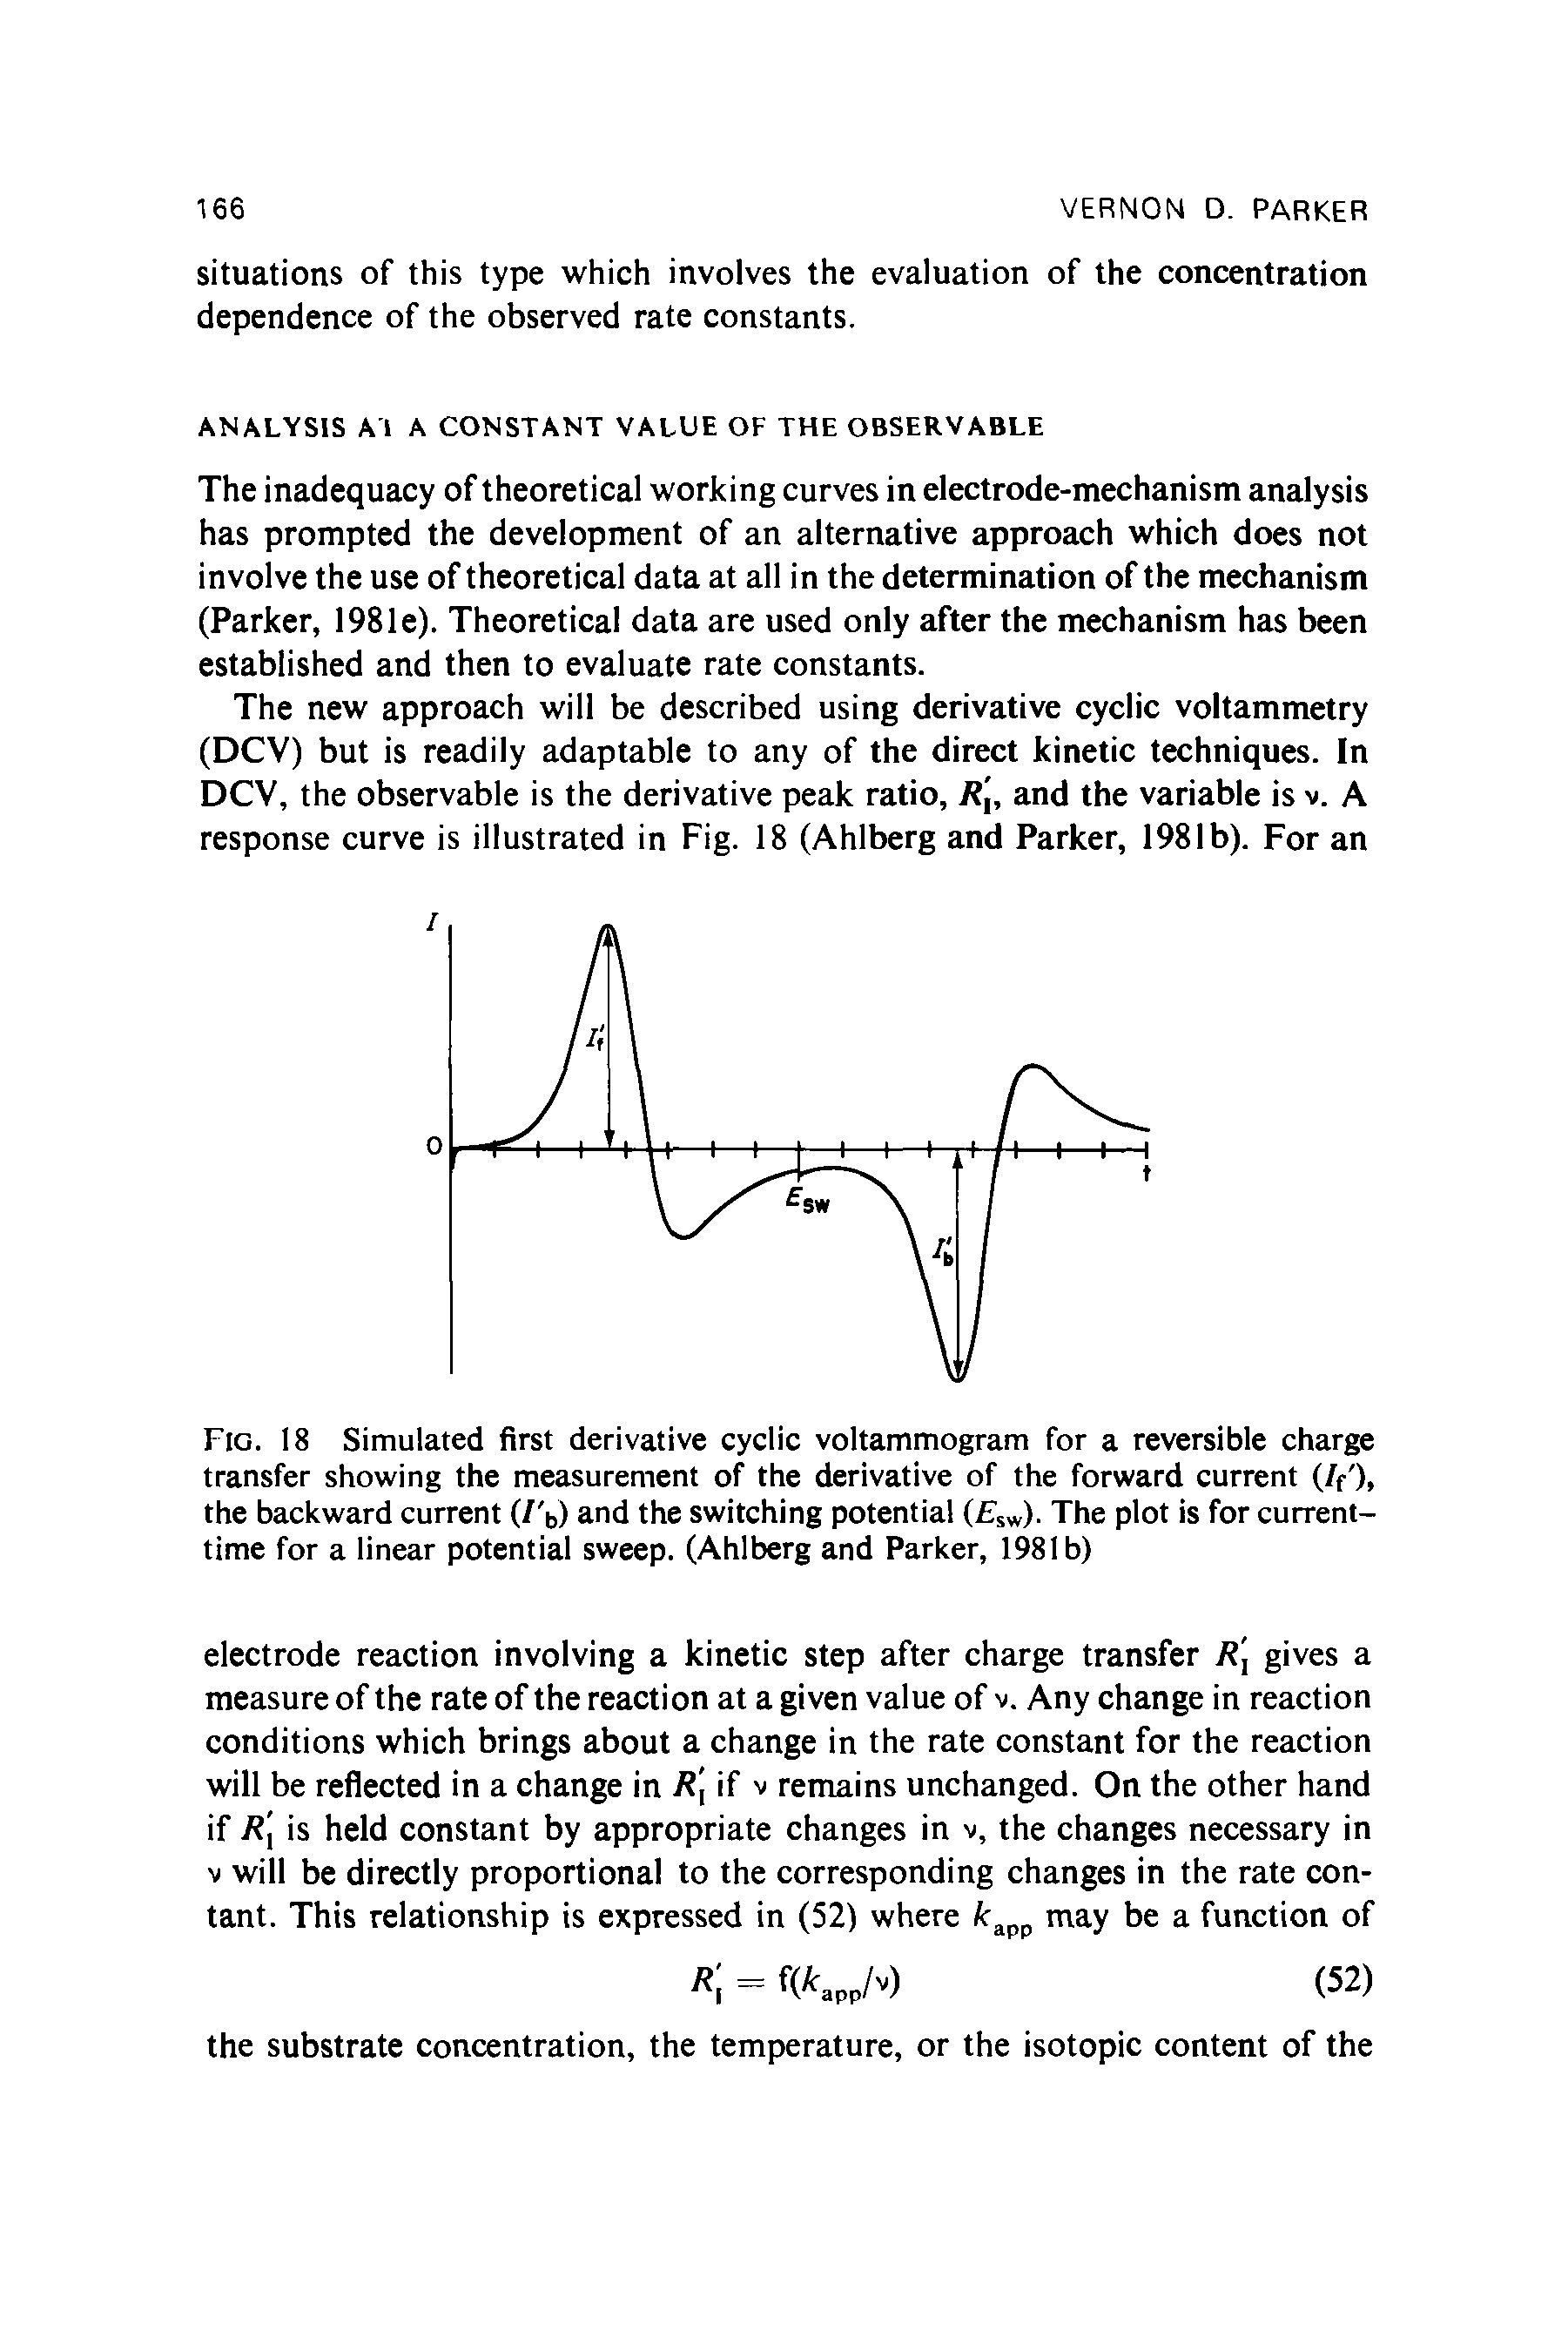 Fig. 18 Simulated first derivative cyclic voltammogram for a reversible charge transfer showing the measurement of the derivative of the forward current (//), the backward current (/ b) and the switching potential ( sw)- The plot is for currenttime for a linear potential sweep. (Ahlberg and Parker, 1981b)...